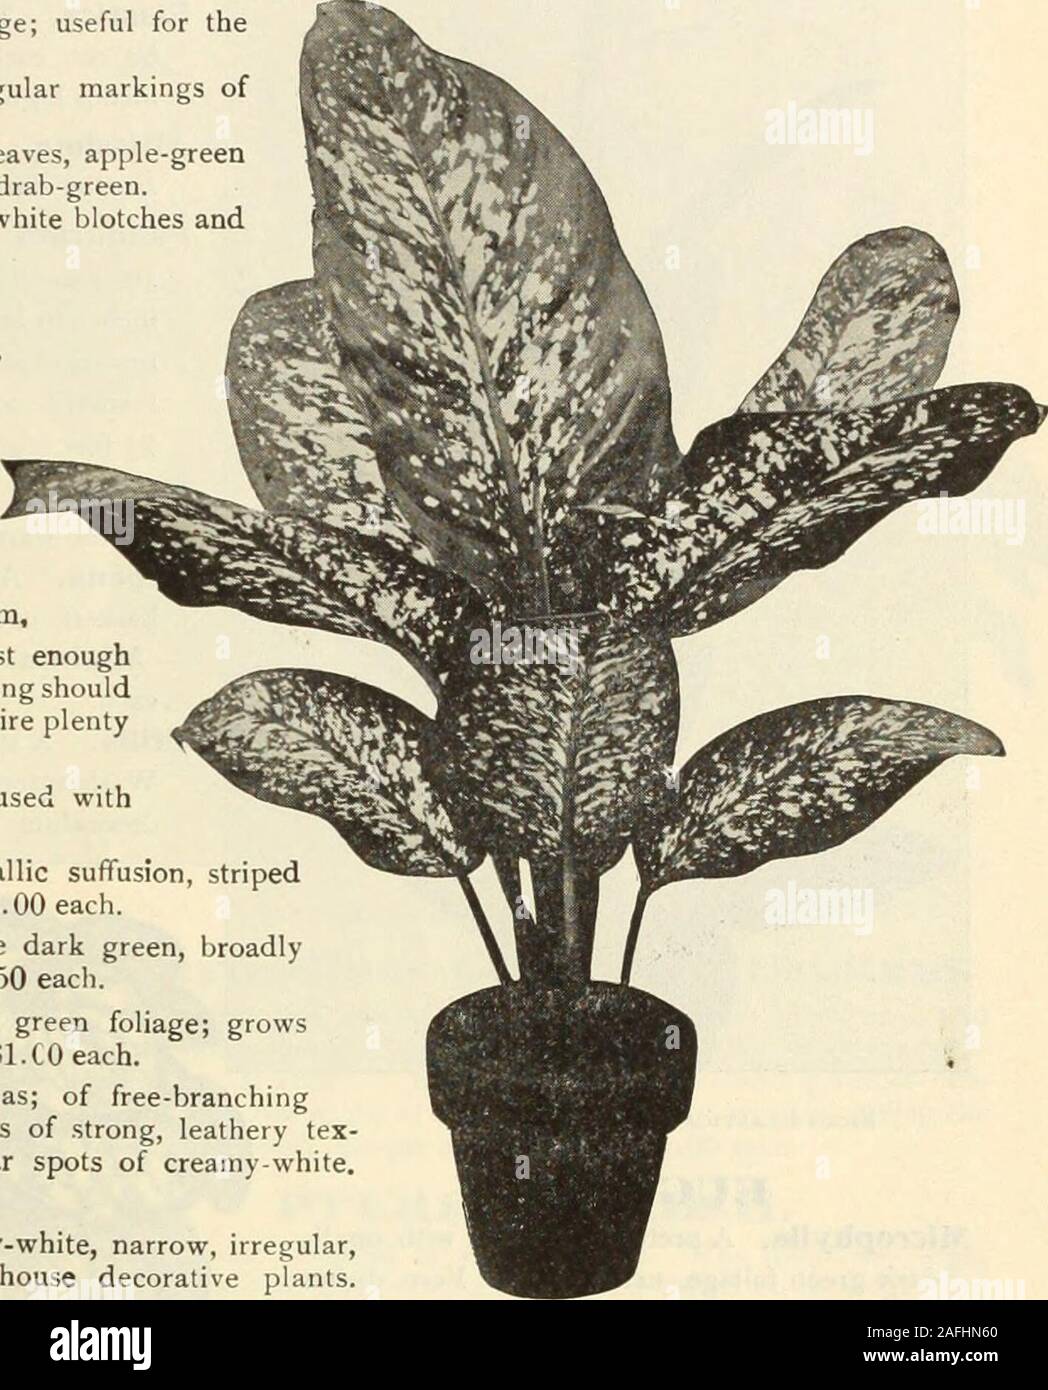 . Dreer's garden book 1915. of their coloring.Amabilis. Foliage bright glossy green, marked and suffused with pink and creamy-white. 50 cts. and $1.00 each.Baptistii. Broad, recurved foliage, deep green, with metallic suffusion, striped and marked with creamy yellow and pink. 50 cts. and $1.00 each.Doucetii. A beautiful variegated form of lixlirisa, foliage dark green, broadly edged with creamy white. Fine plants in 6-inch pots, $2.50 each. Fragrans. An excellent house plant, with broad, dark green foliage; growsunder the most adverse conditions, 25 cts., 50 cts., and $1.CO each. Godseffiana. Stock Photo